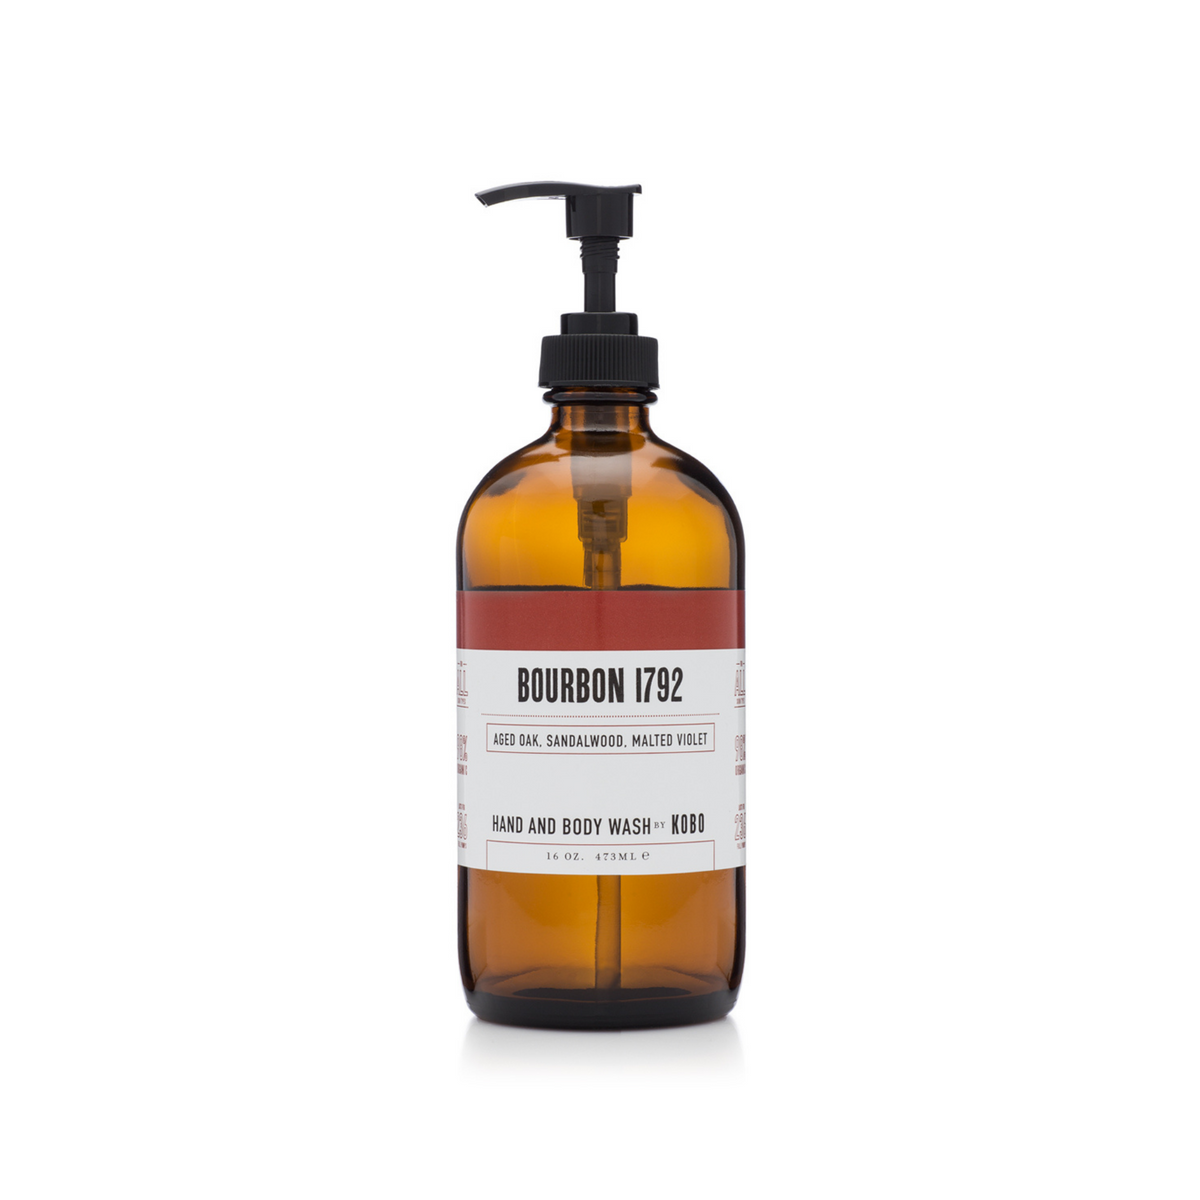 Primary Image of Bourbon 1792 Hand and Body Wash